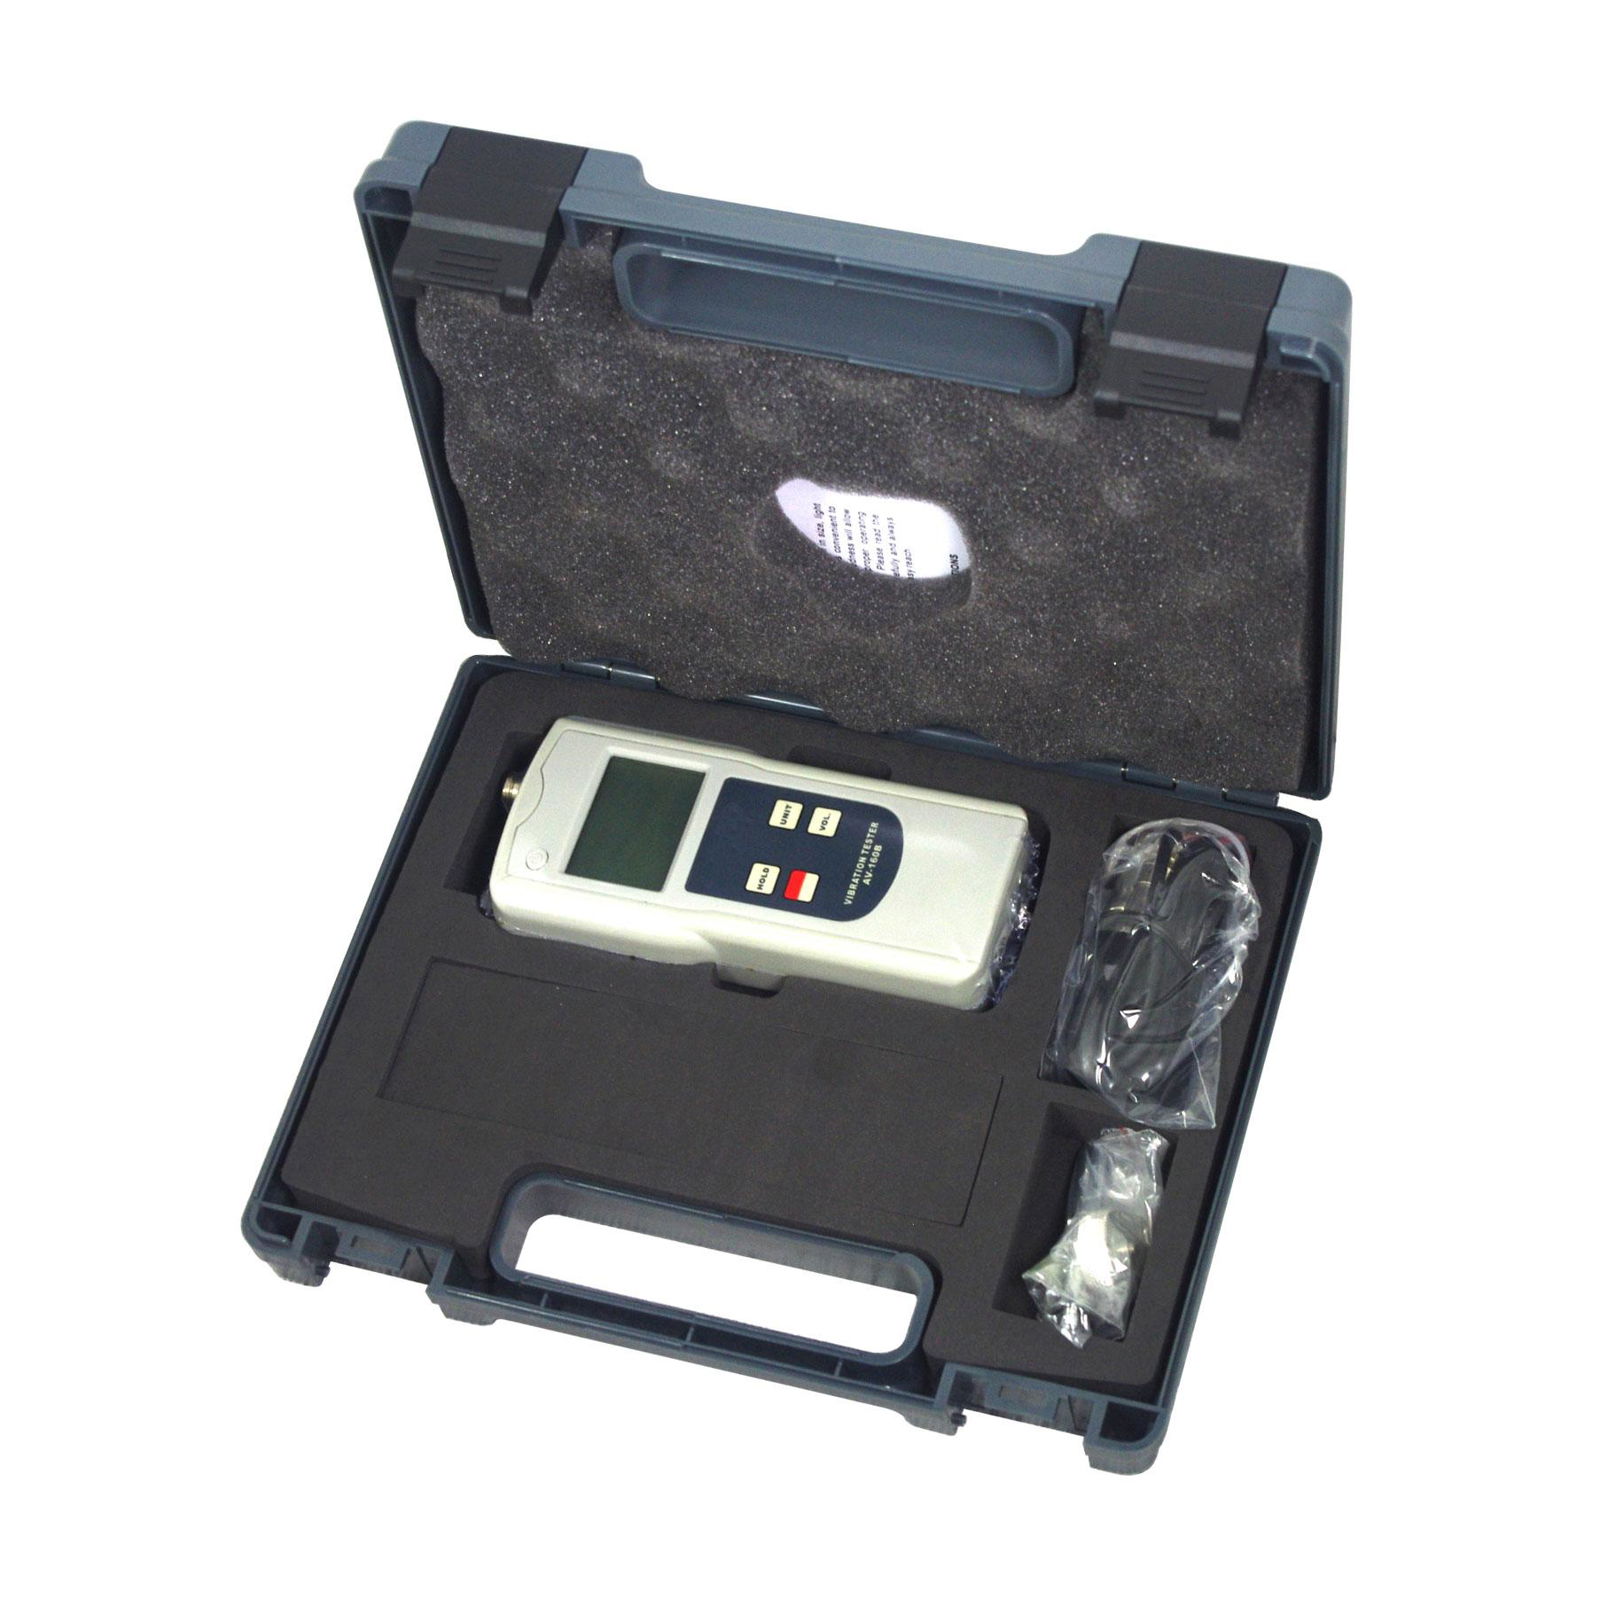 AV-160B Portable Vibration Meter with Acceleration Velocity Displacement Tester 4